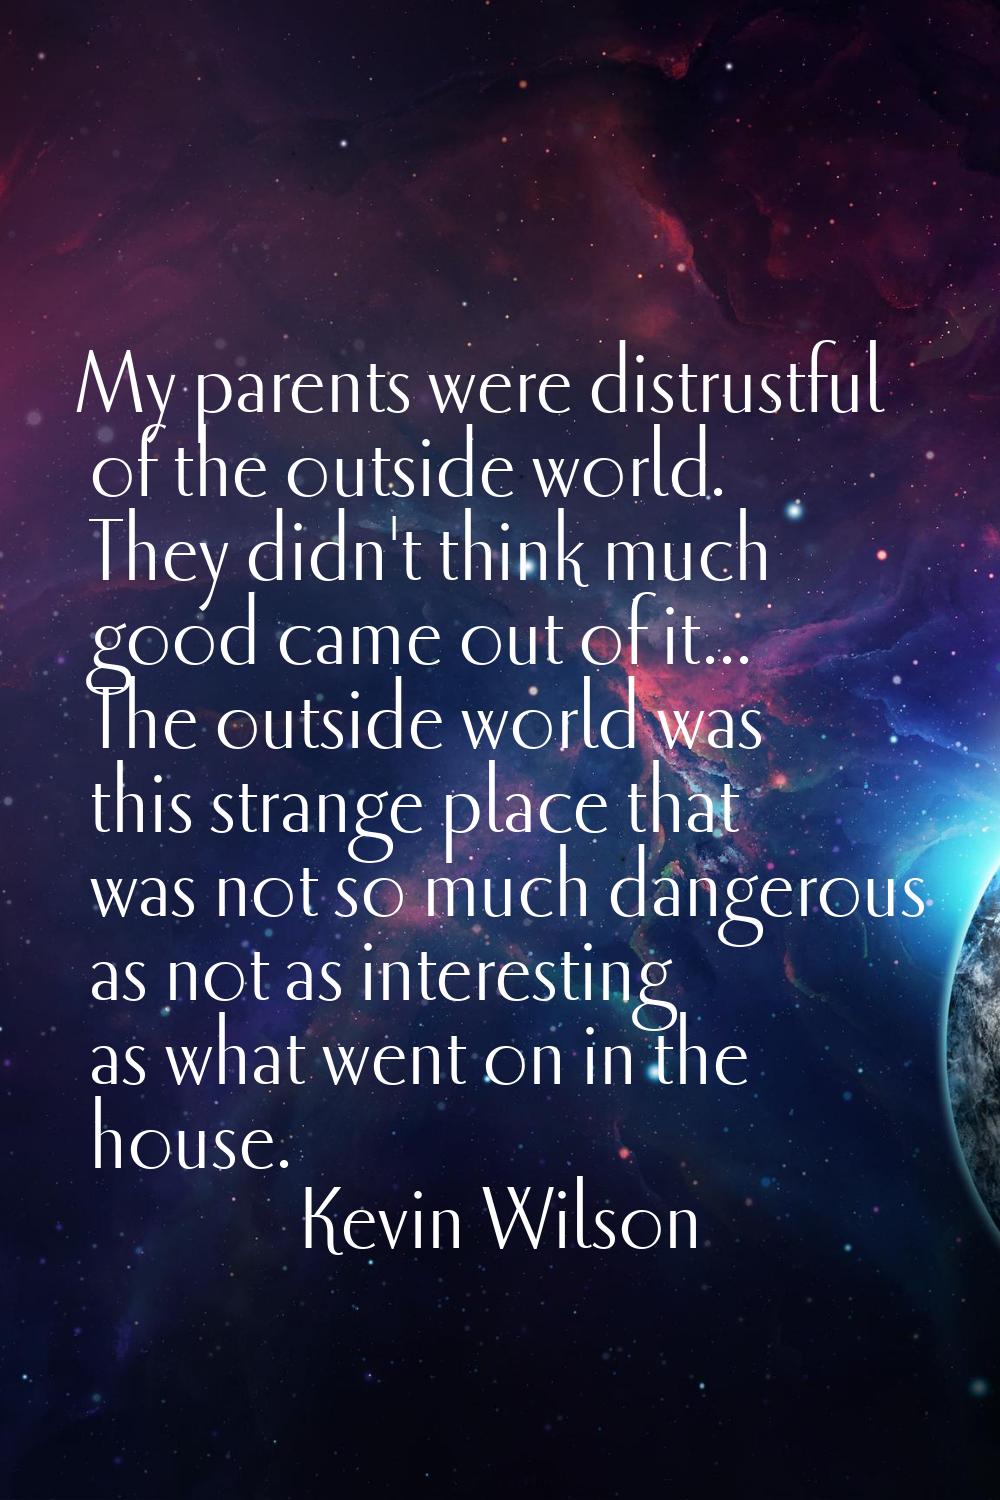 My parents were distrustful of the outside world. They didn't think much good came out of it... The